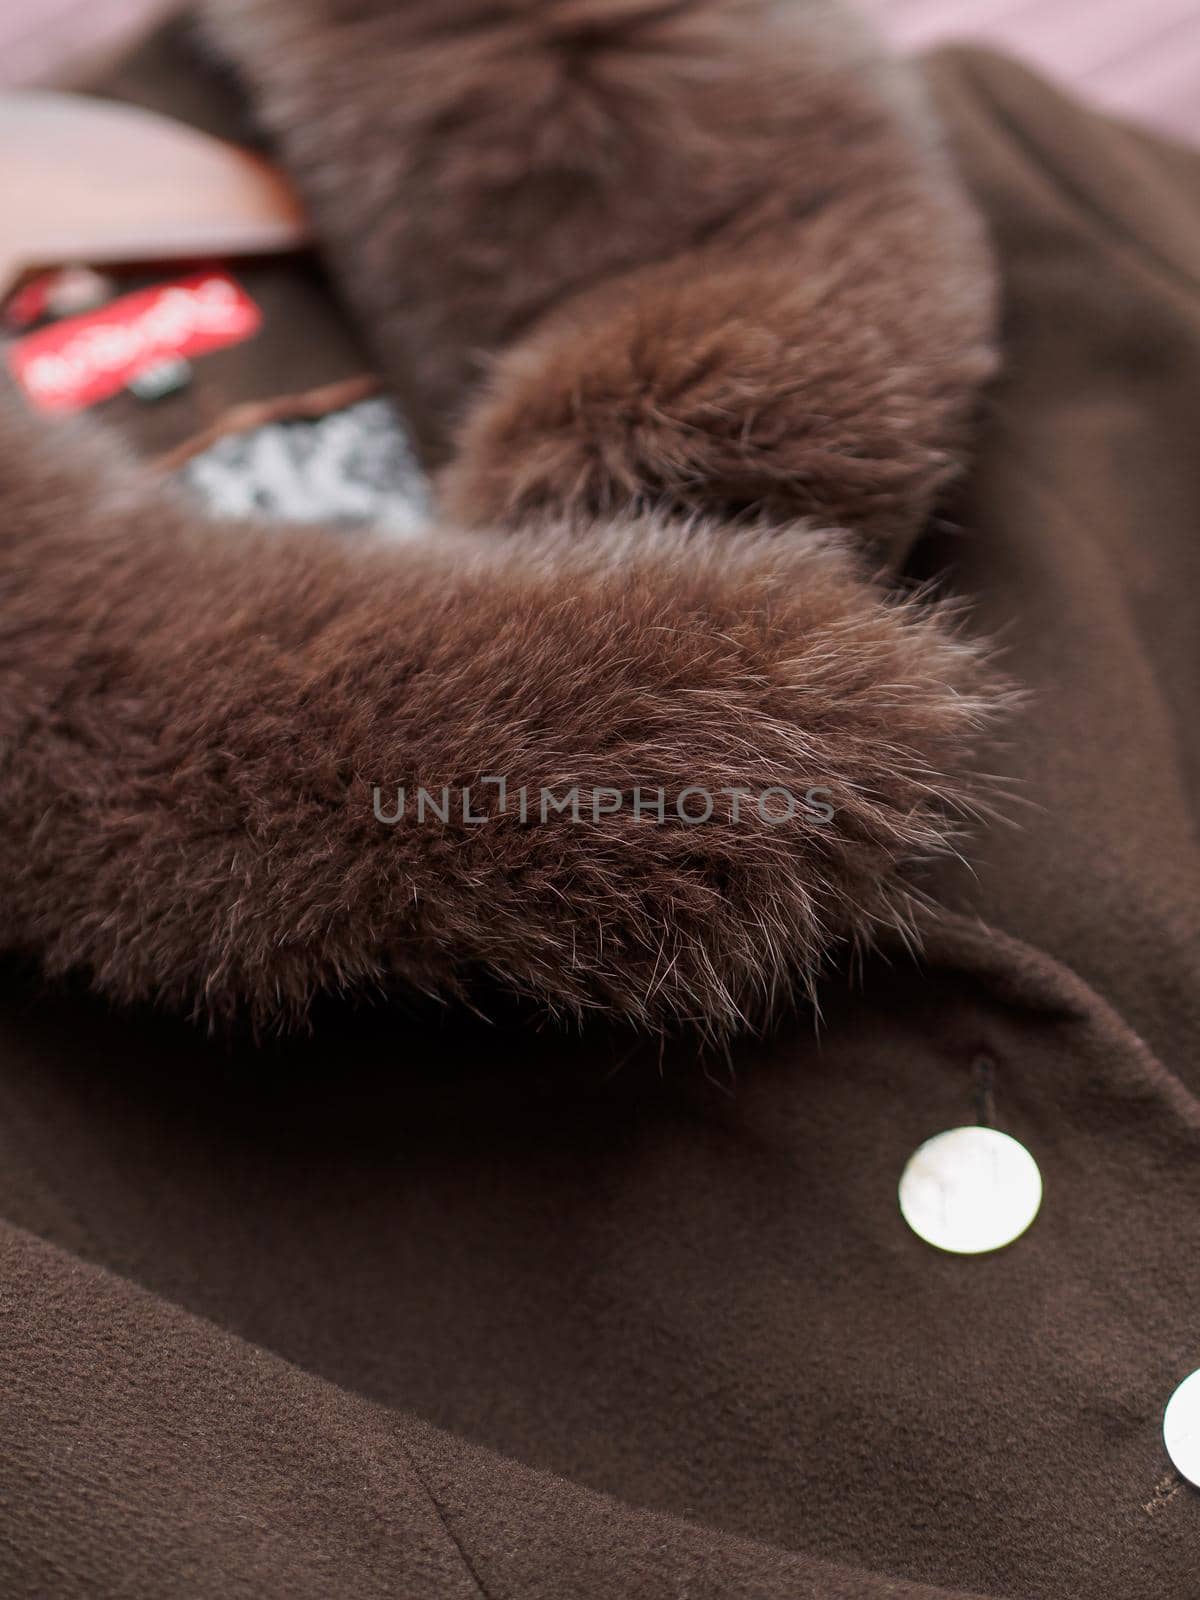 Close up of fashionable mens brown coat combined with brown fashionable sweater. Low DOF.